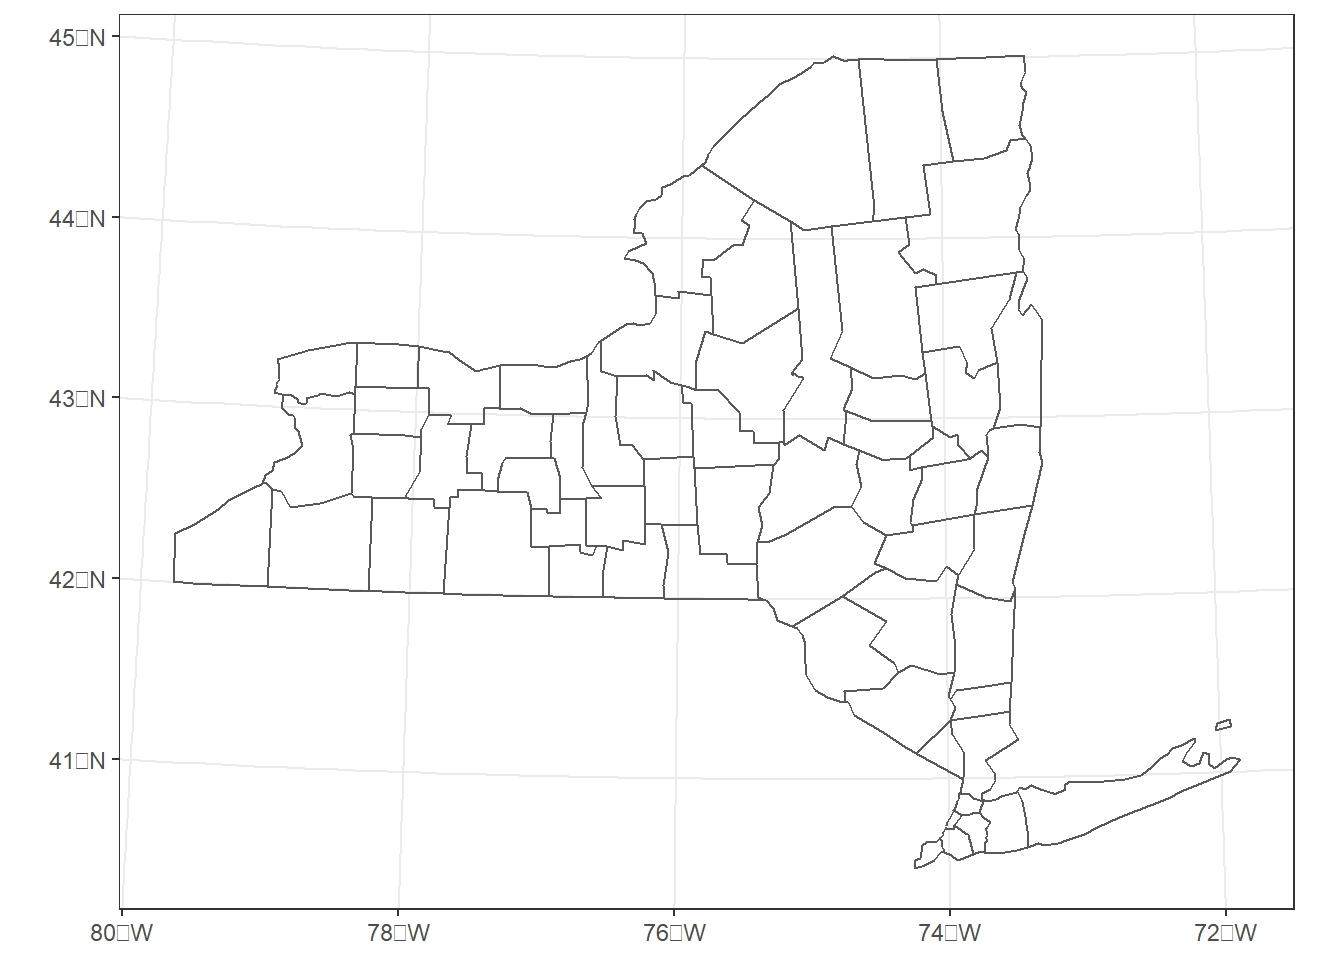 New York counties in the UTM zone 18 north coordinate system.